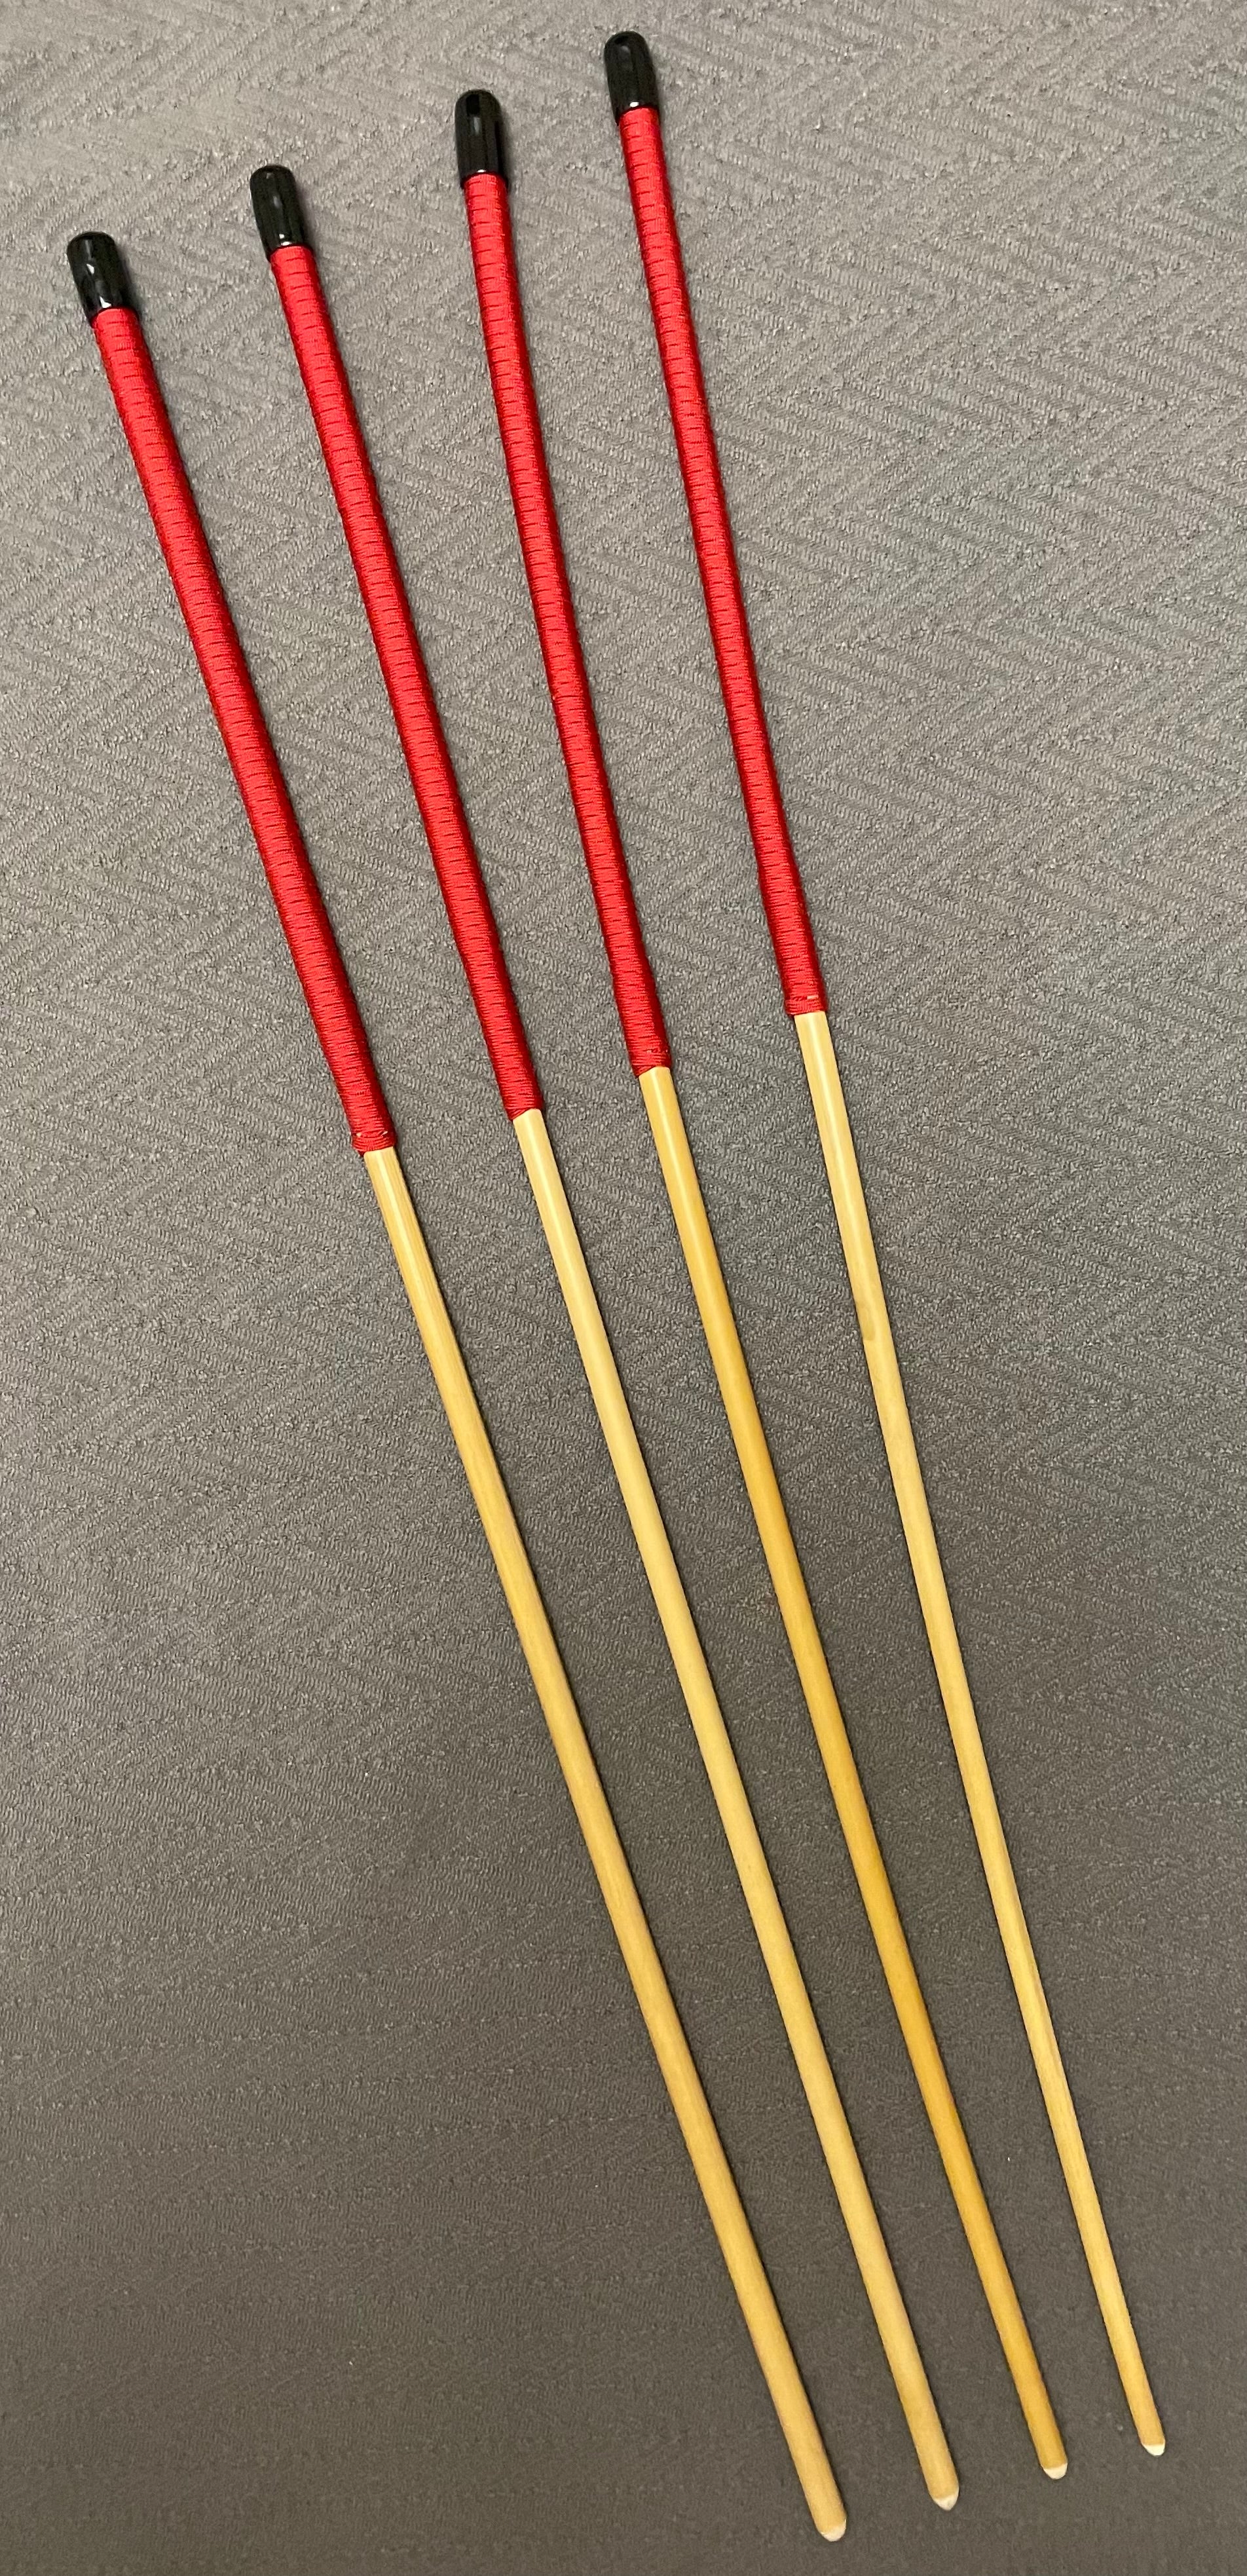 Set of 4 Knotless / No Knot Dragon Canes 82 to 84 cms Length with Red Paracord Handles